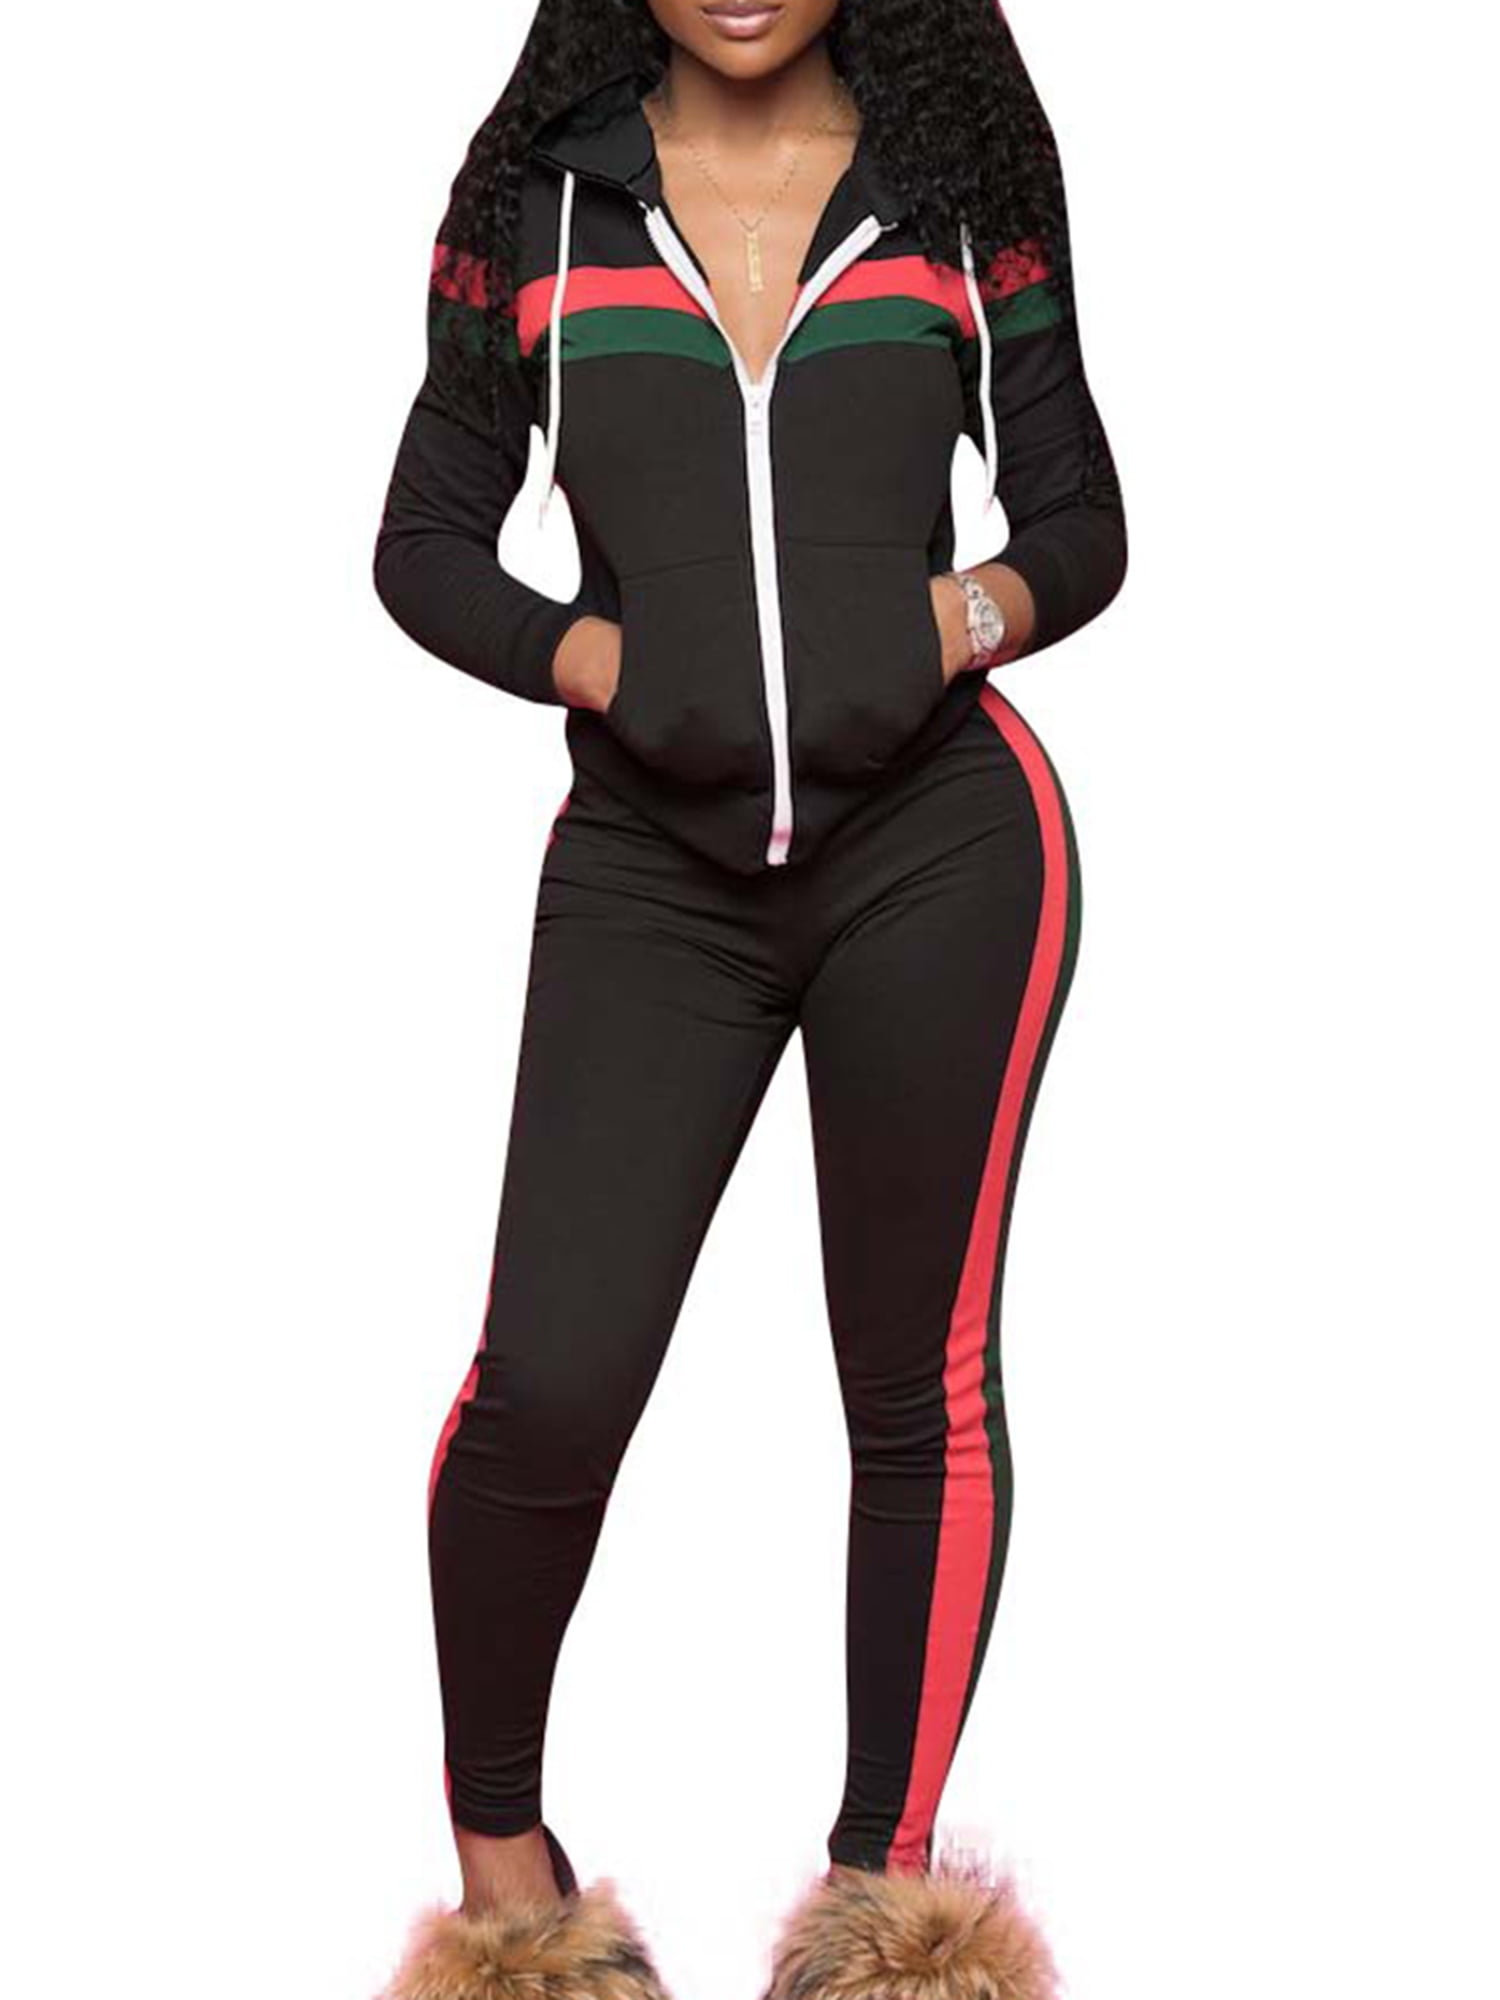 Womens 2PCS Stripe Patchwork Tracksuit Sets Sweatsuits Outfits Pullover Hoodie Sweatshirt and Jogging Sweatpants Suit 